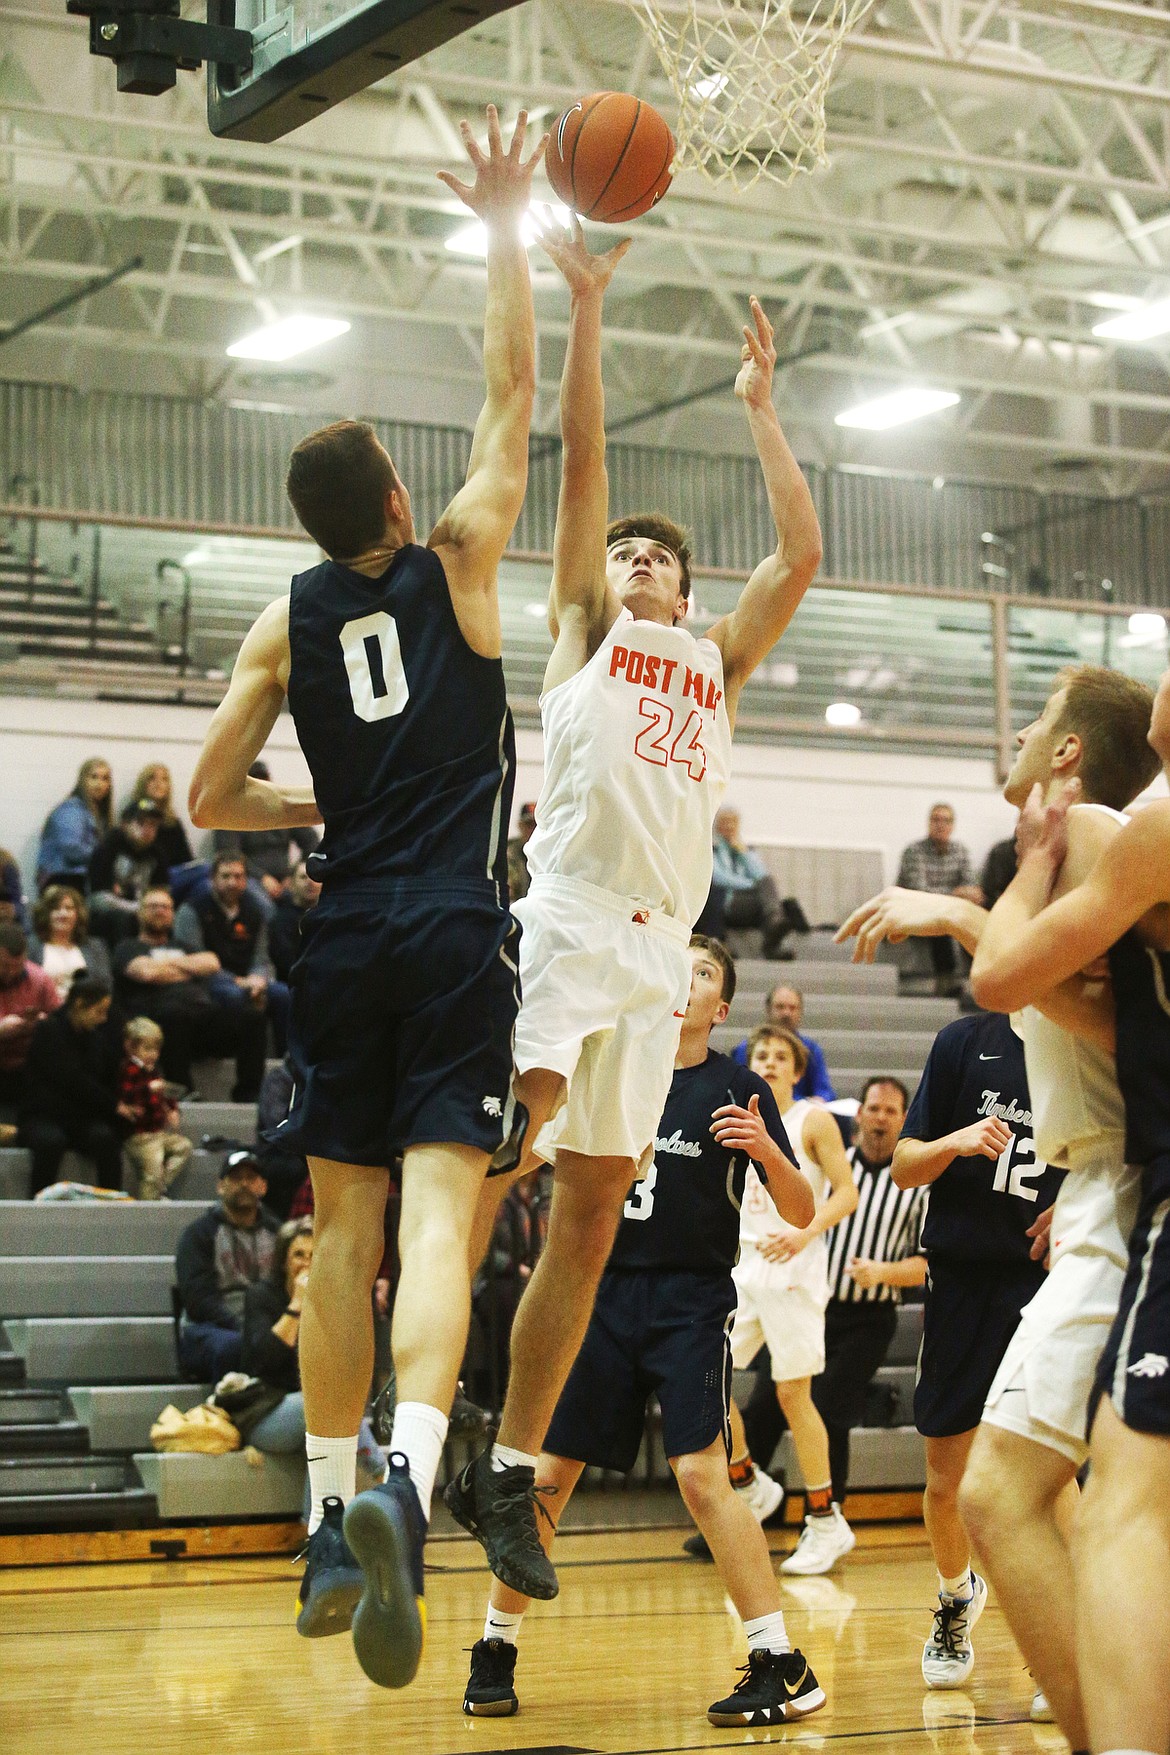 Post Falls guard Alex Horning shoots a layup while defended by Lake City's Josh Stellflug during Tuesday night's game in Post Falls. (LOREN BENOIT/Press)